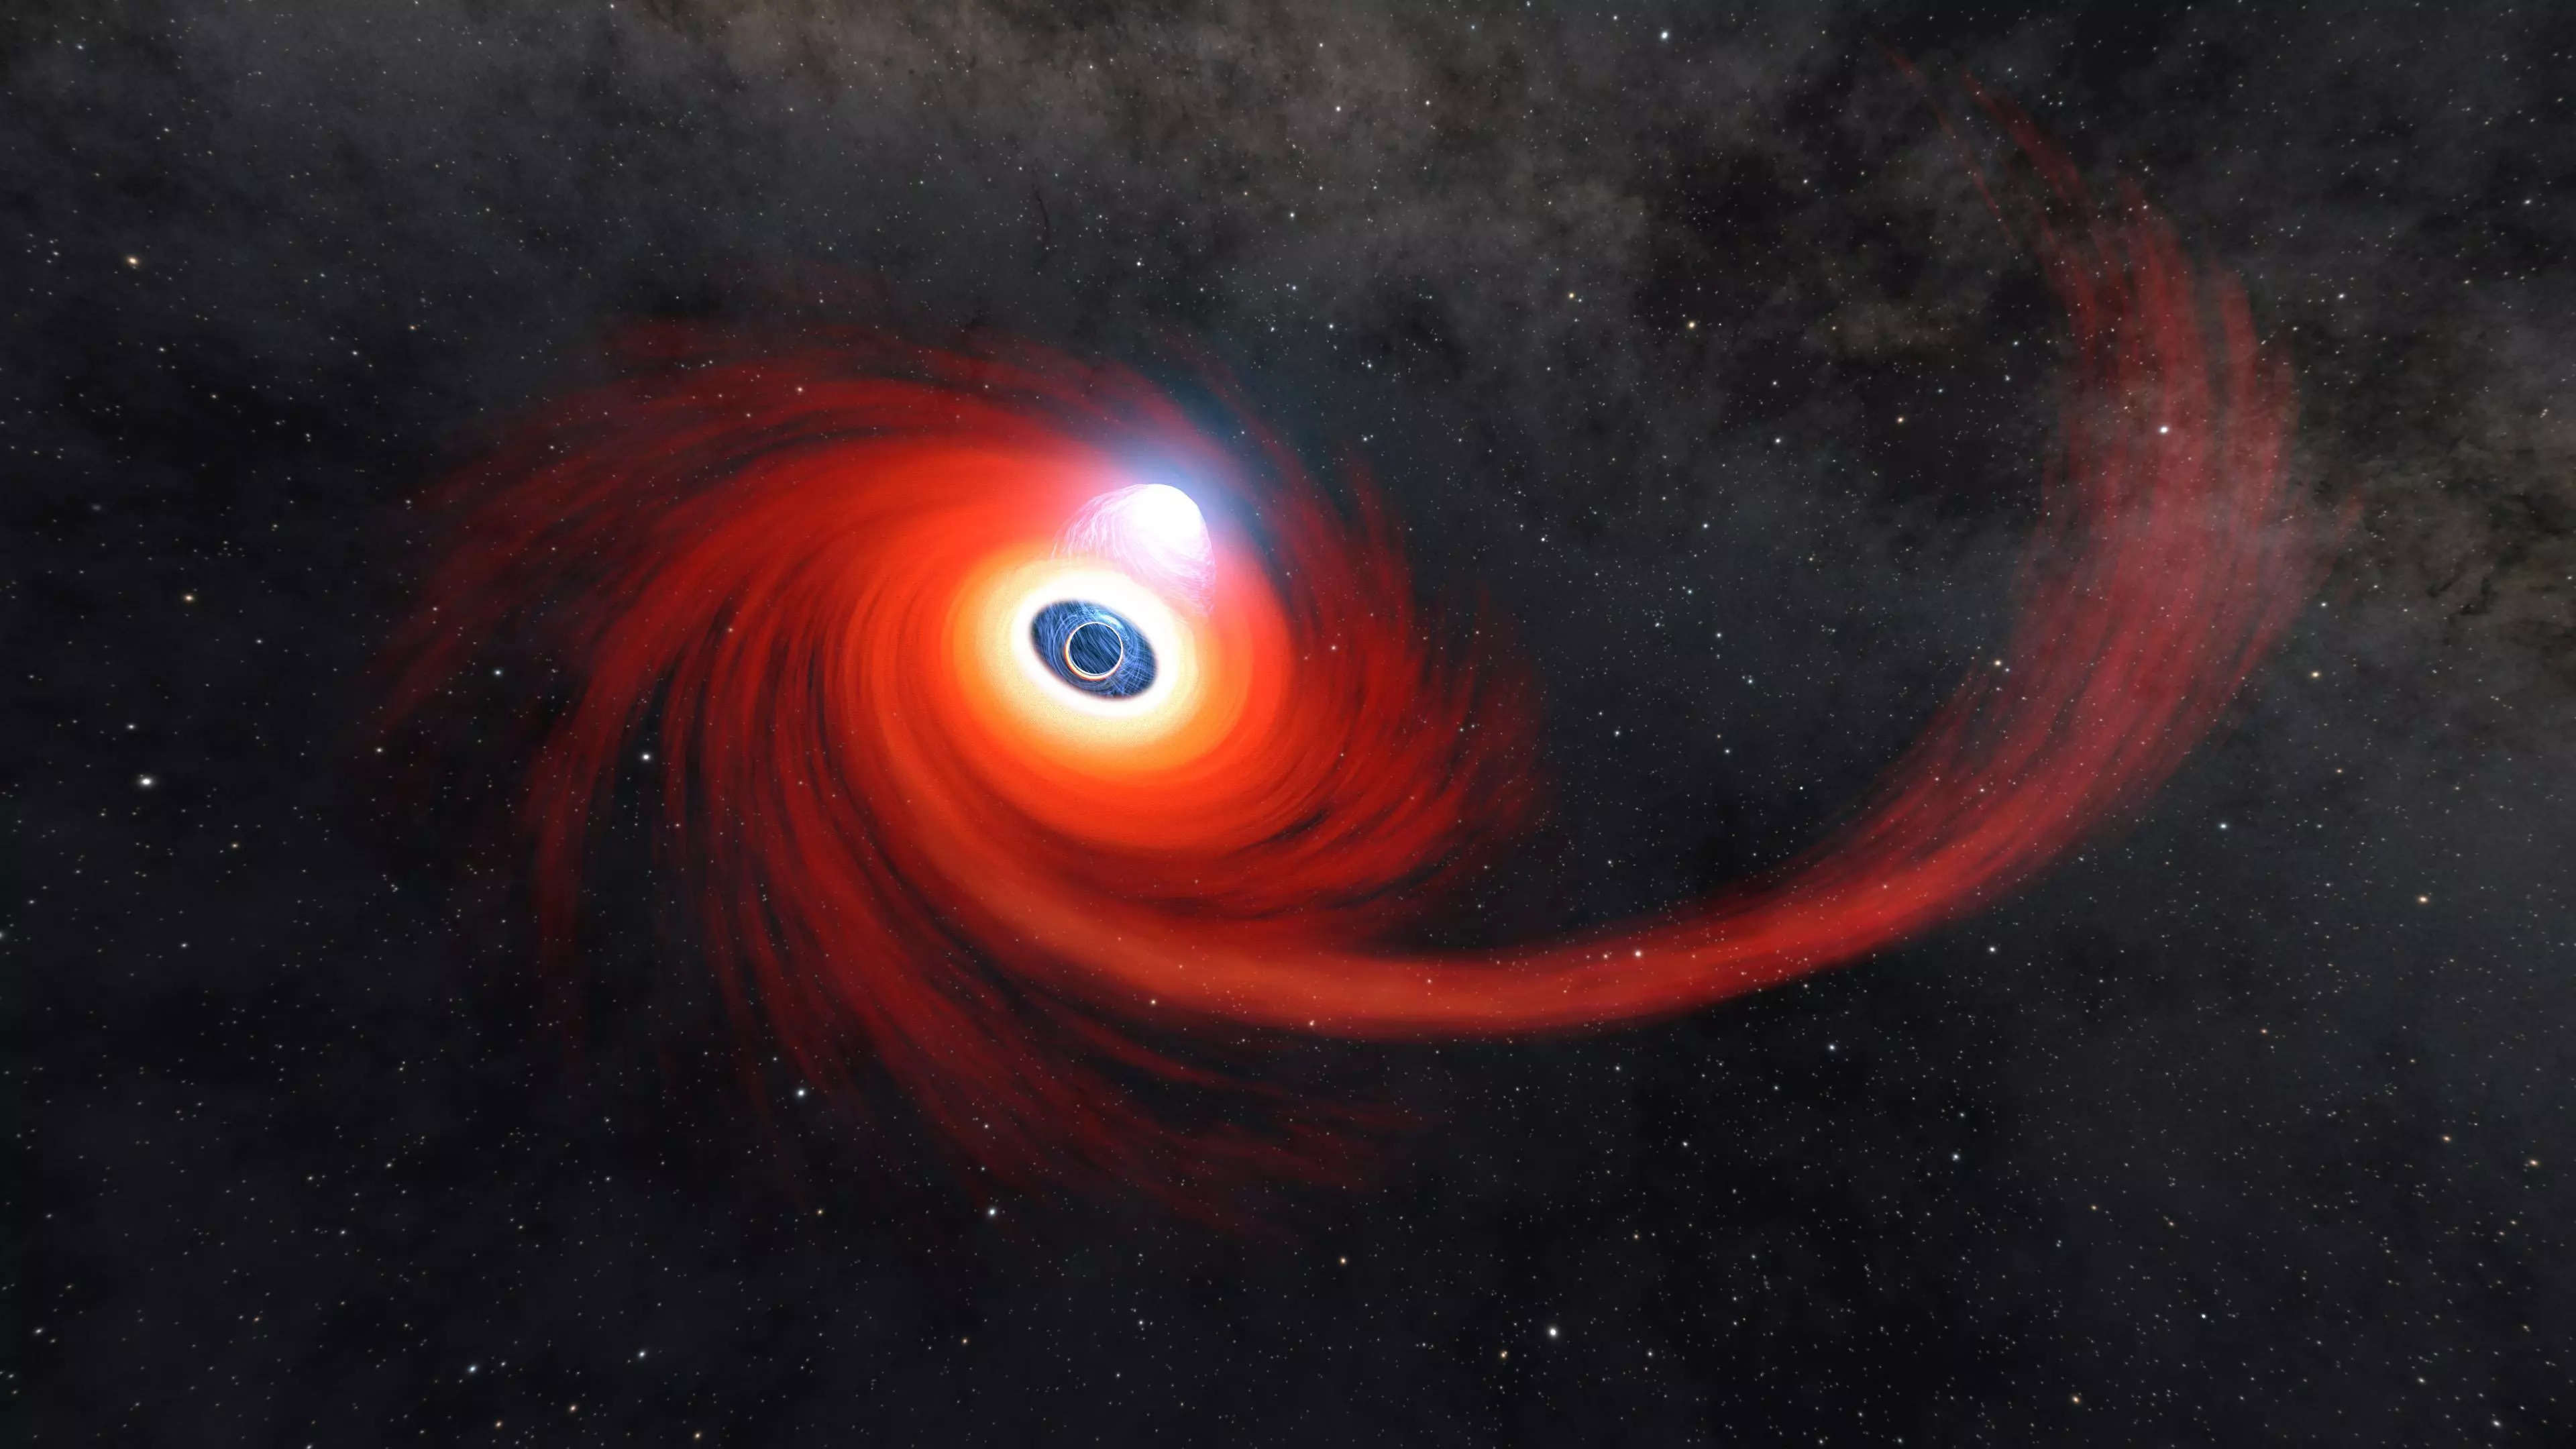 illustration shows black hole dark circle surrounded by spiraling red gas in space